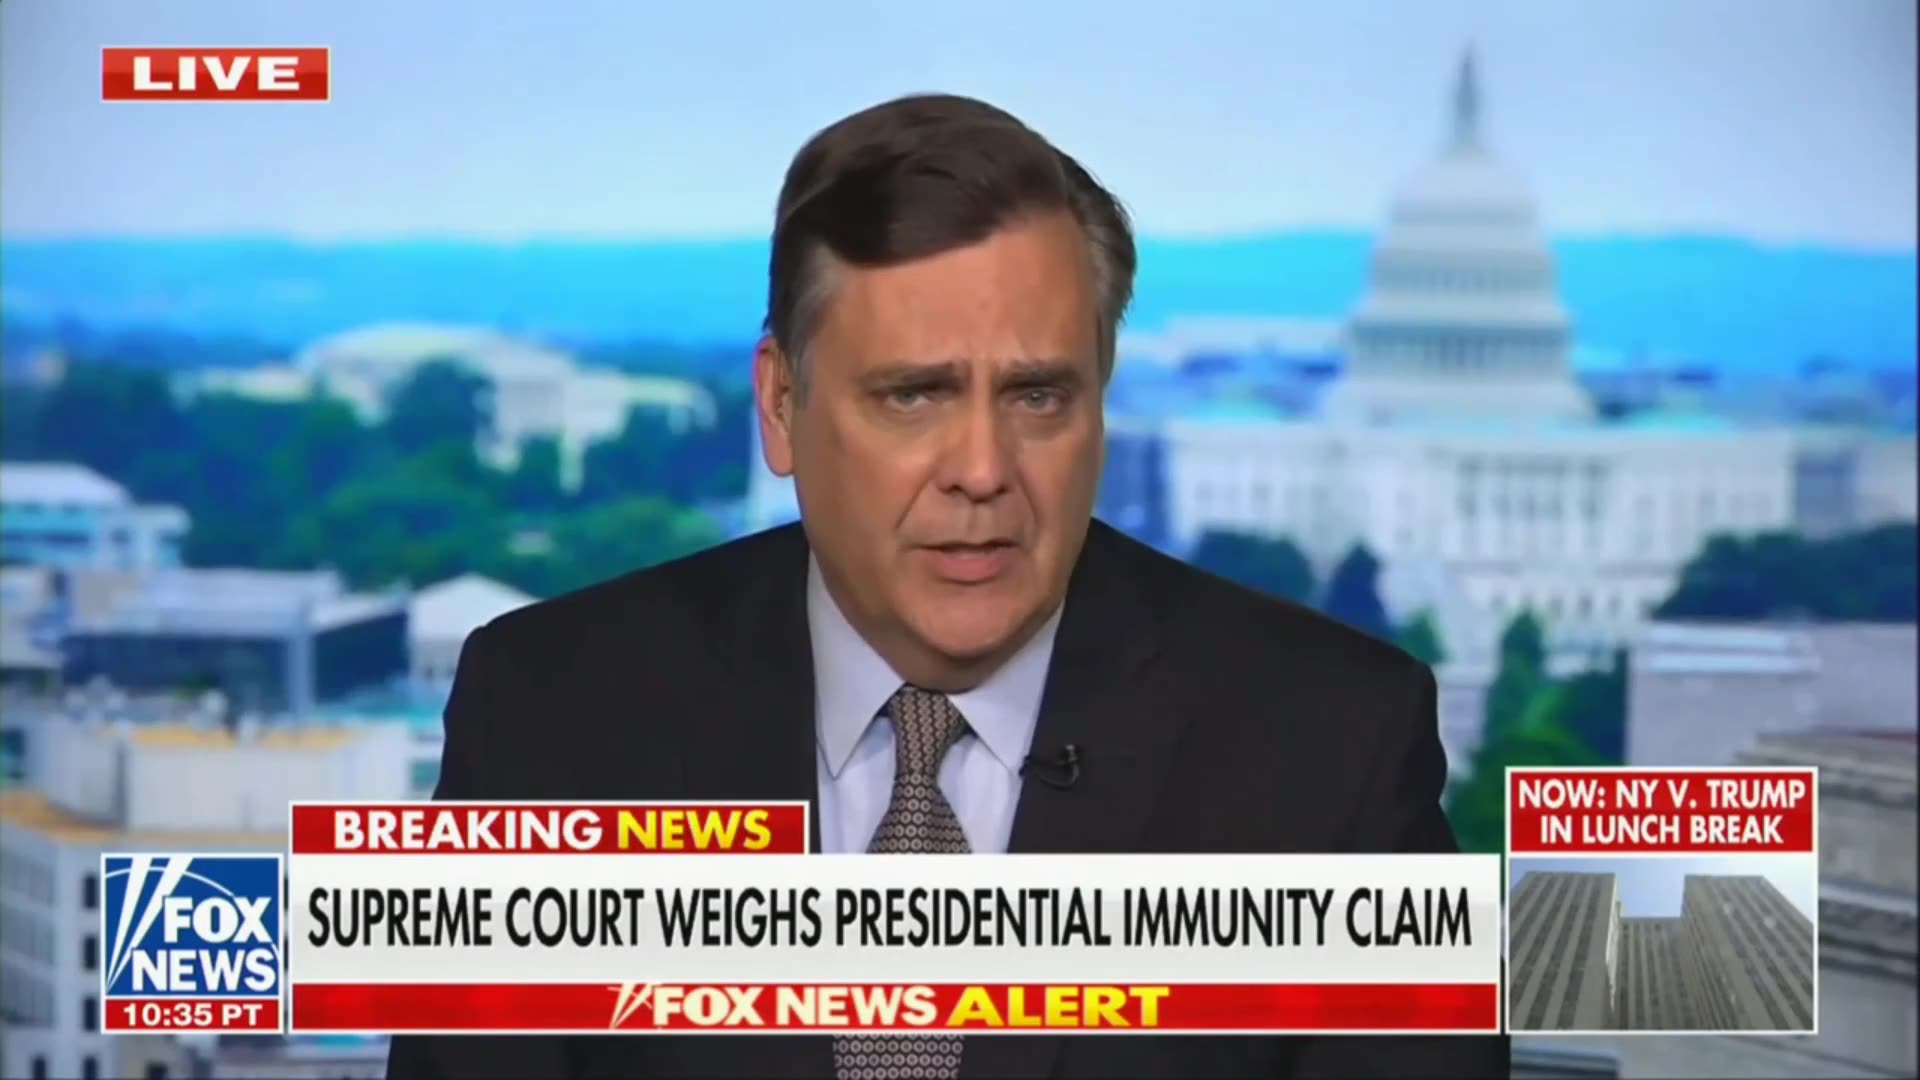 Jonathan Turley Says Chief Justice Roberts Was 'Openly Mocking' D.C. Circuit On Trump Immunity Case